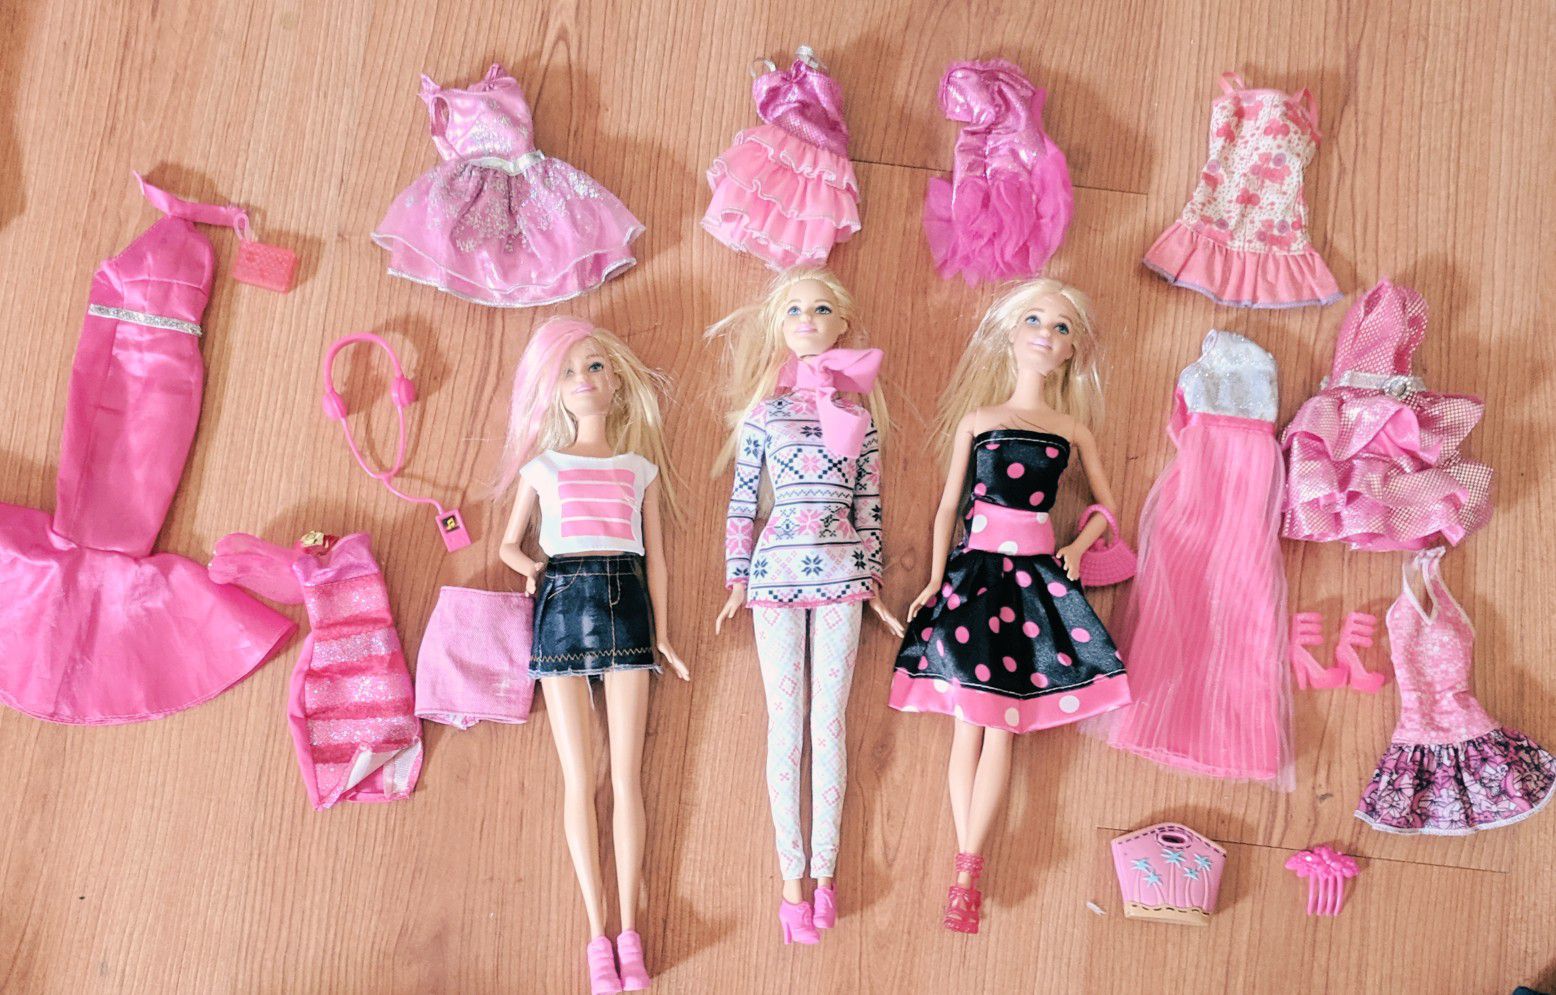 Lot of 3 Barbie Dolls Fully Dressed with Accessories and Extra Clothing